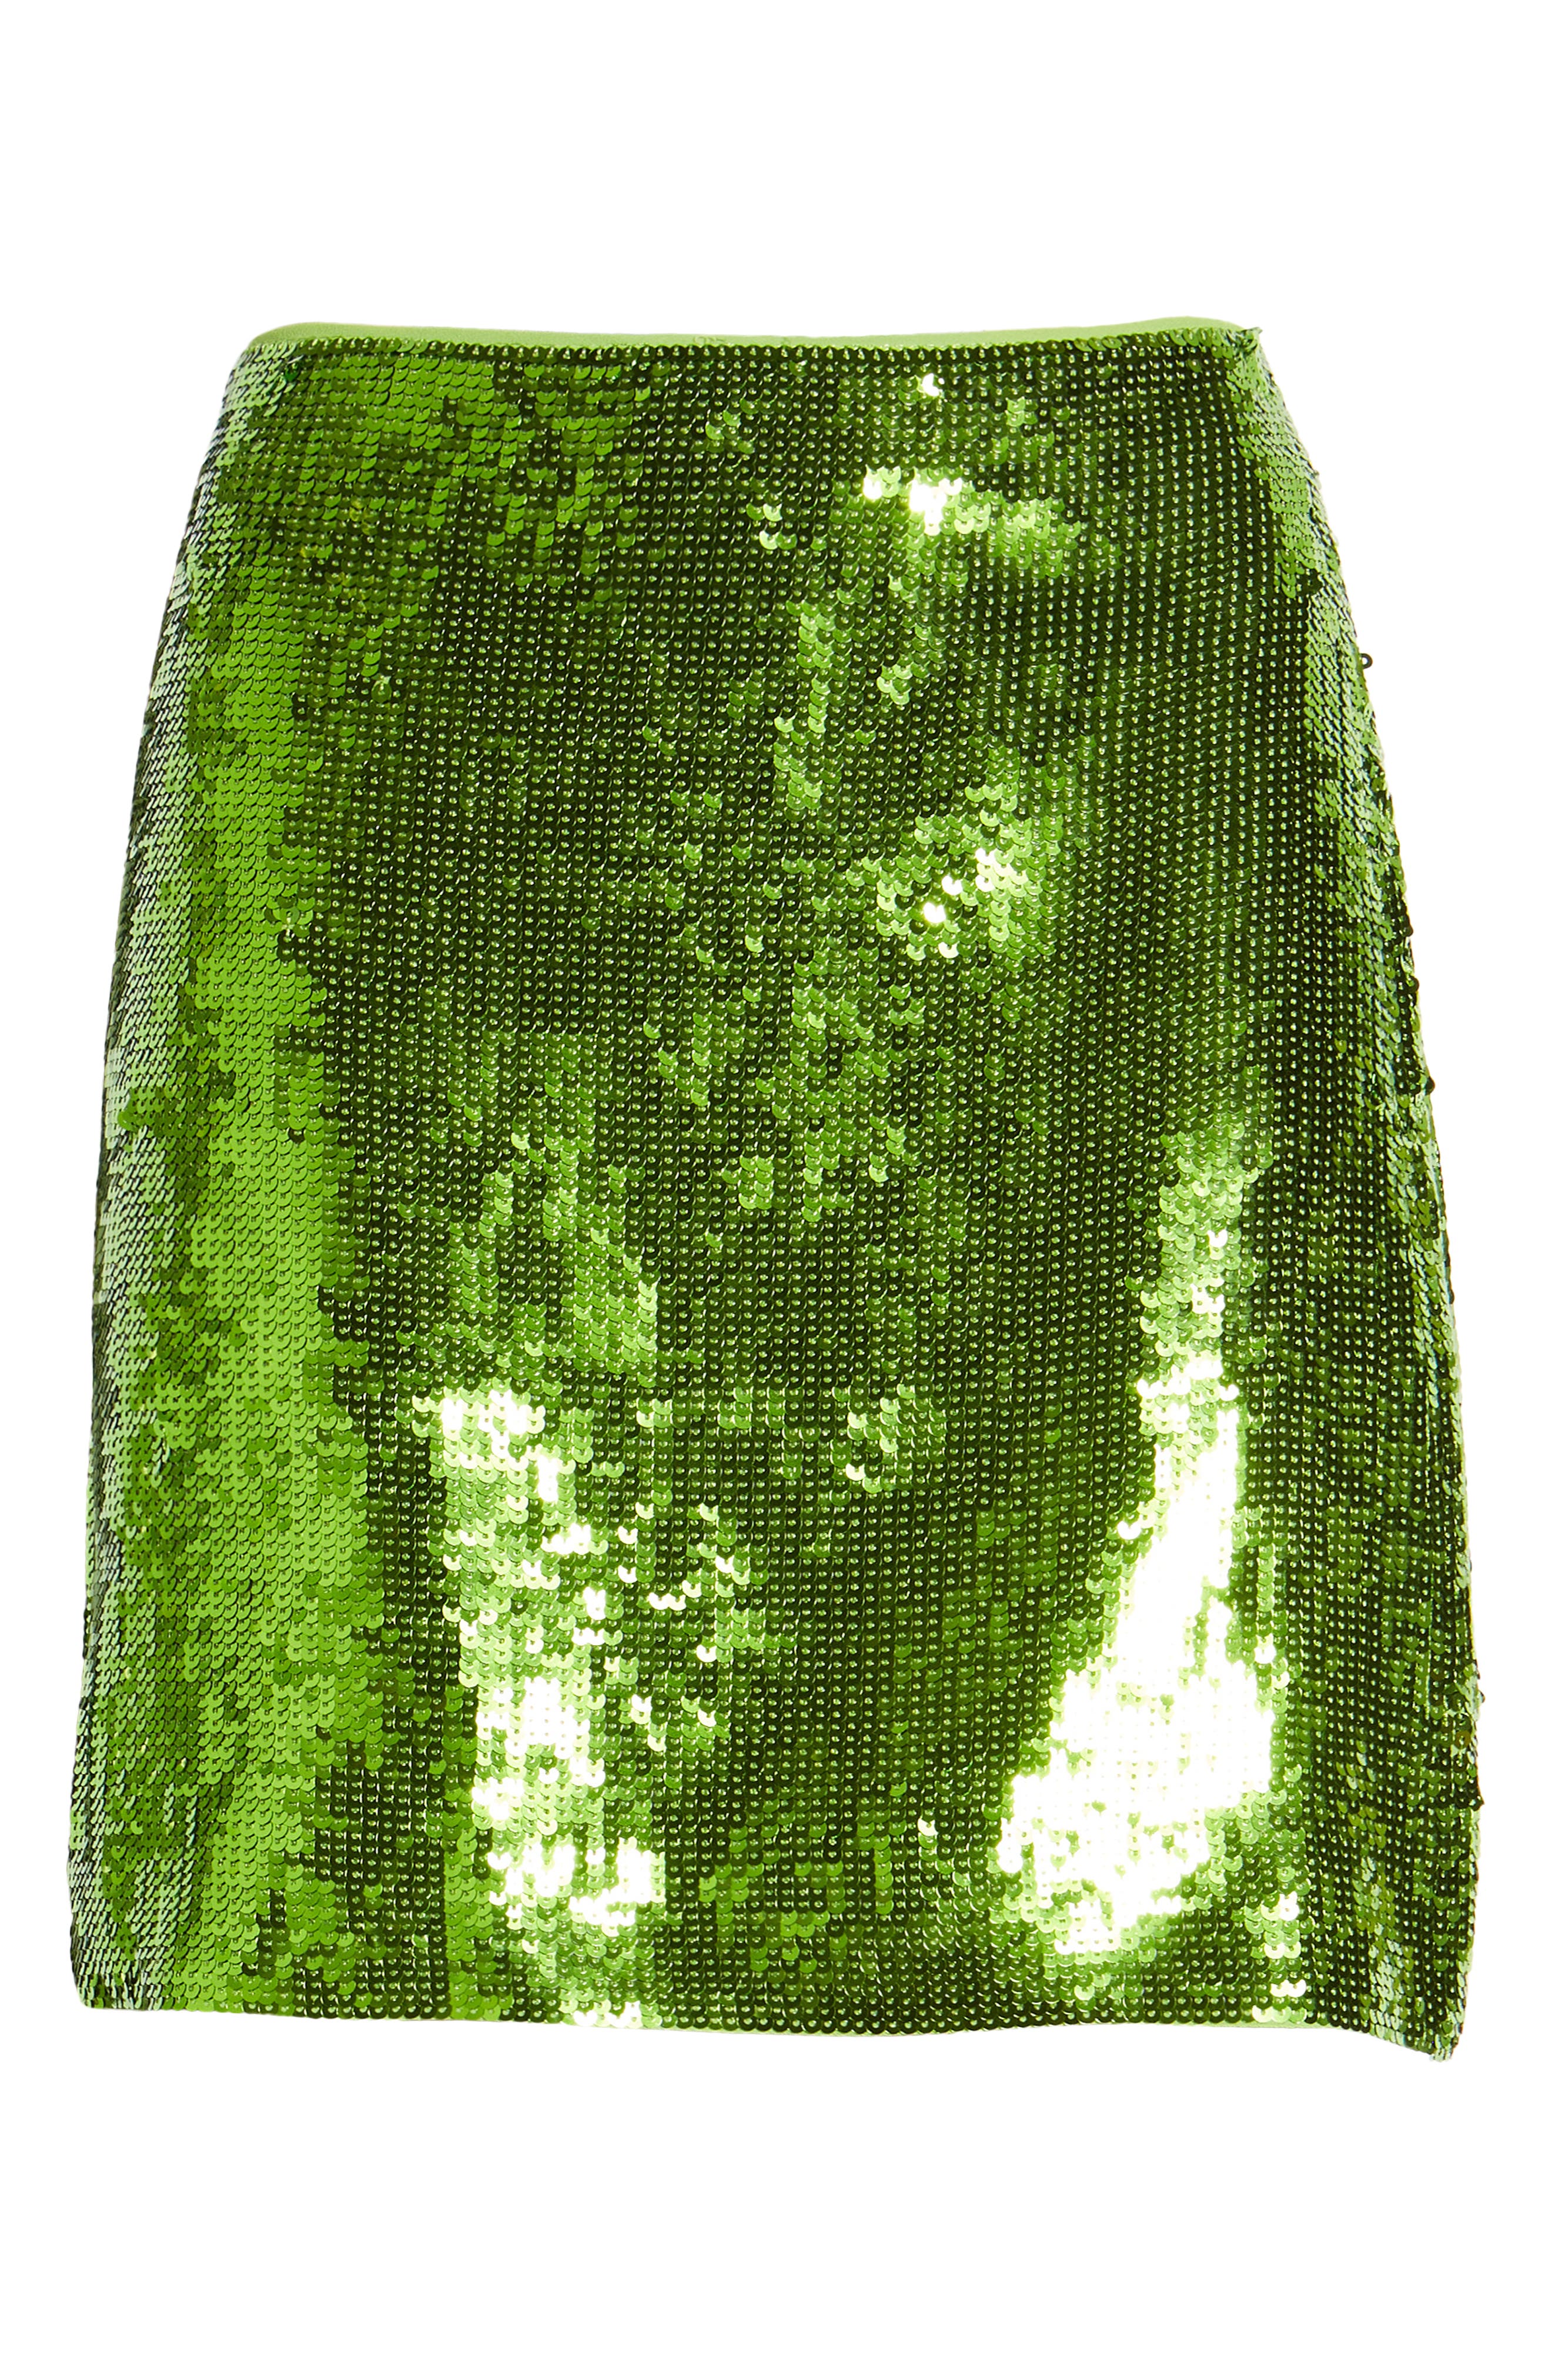 UPC 024100000005 product image for & Other Stories Sequin Miniskirt in Green Sequins at Nordstrom, Size 4 | upcitemdb.com